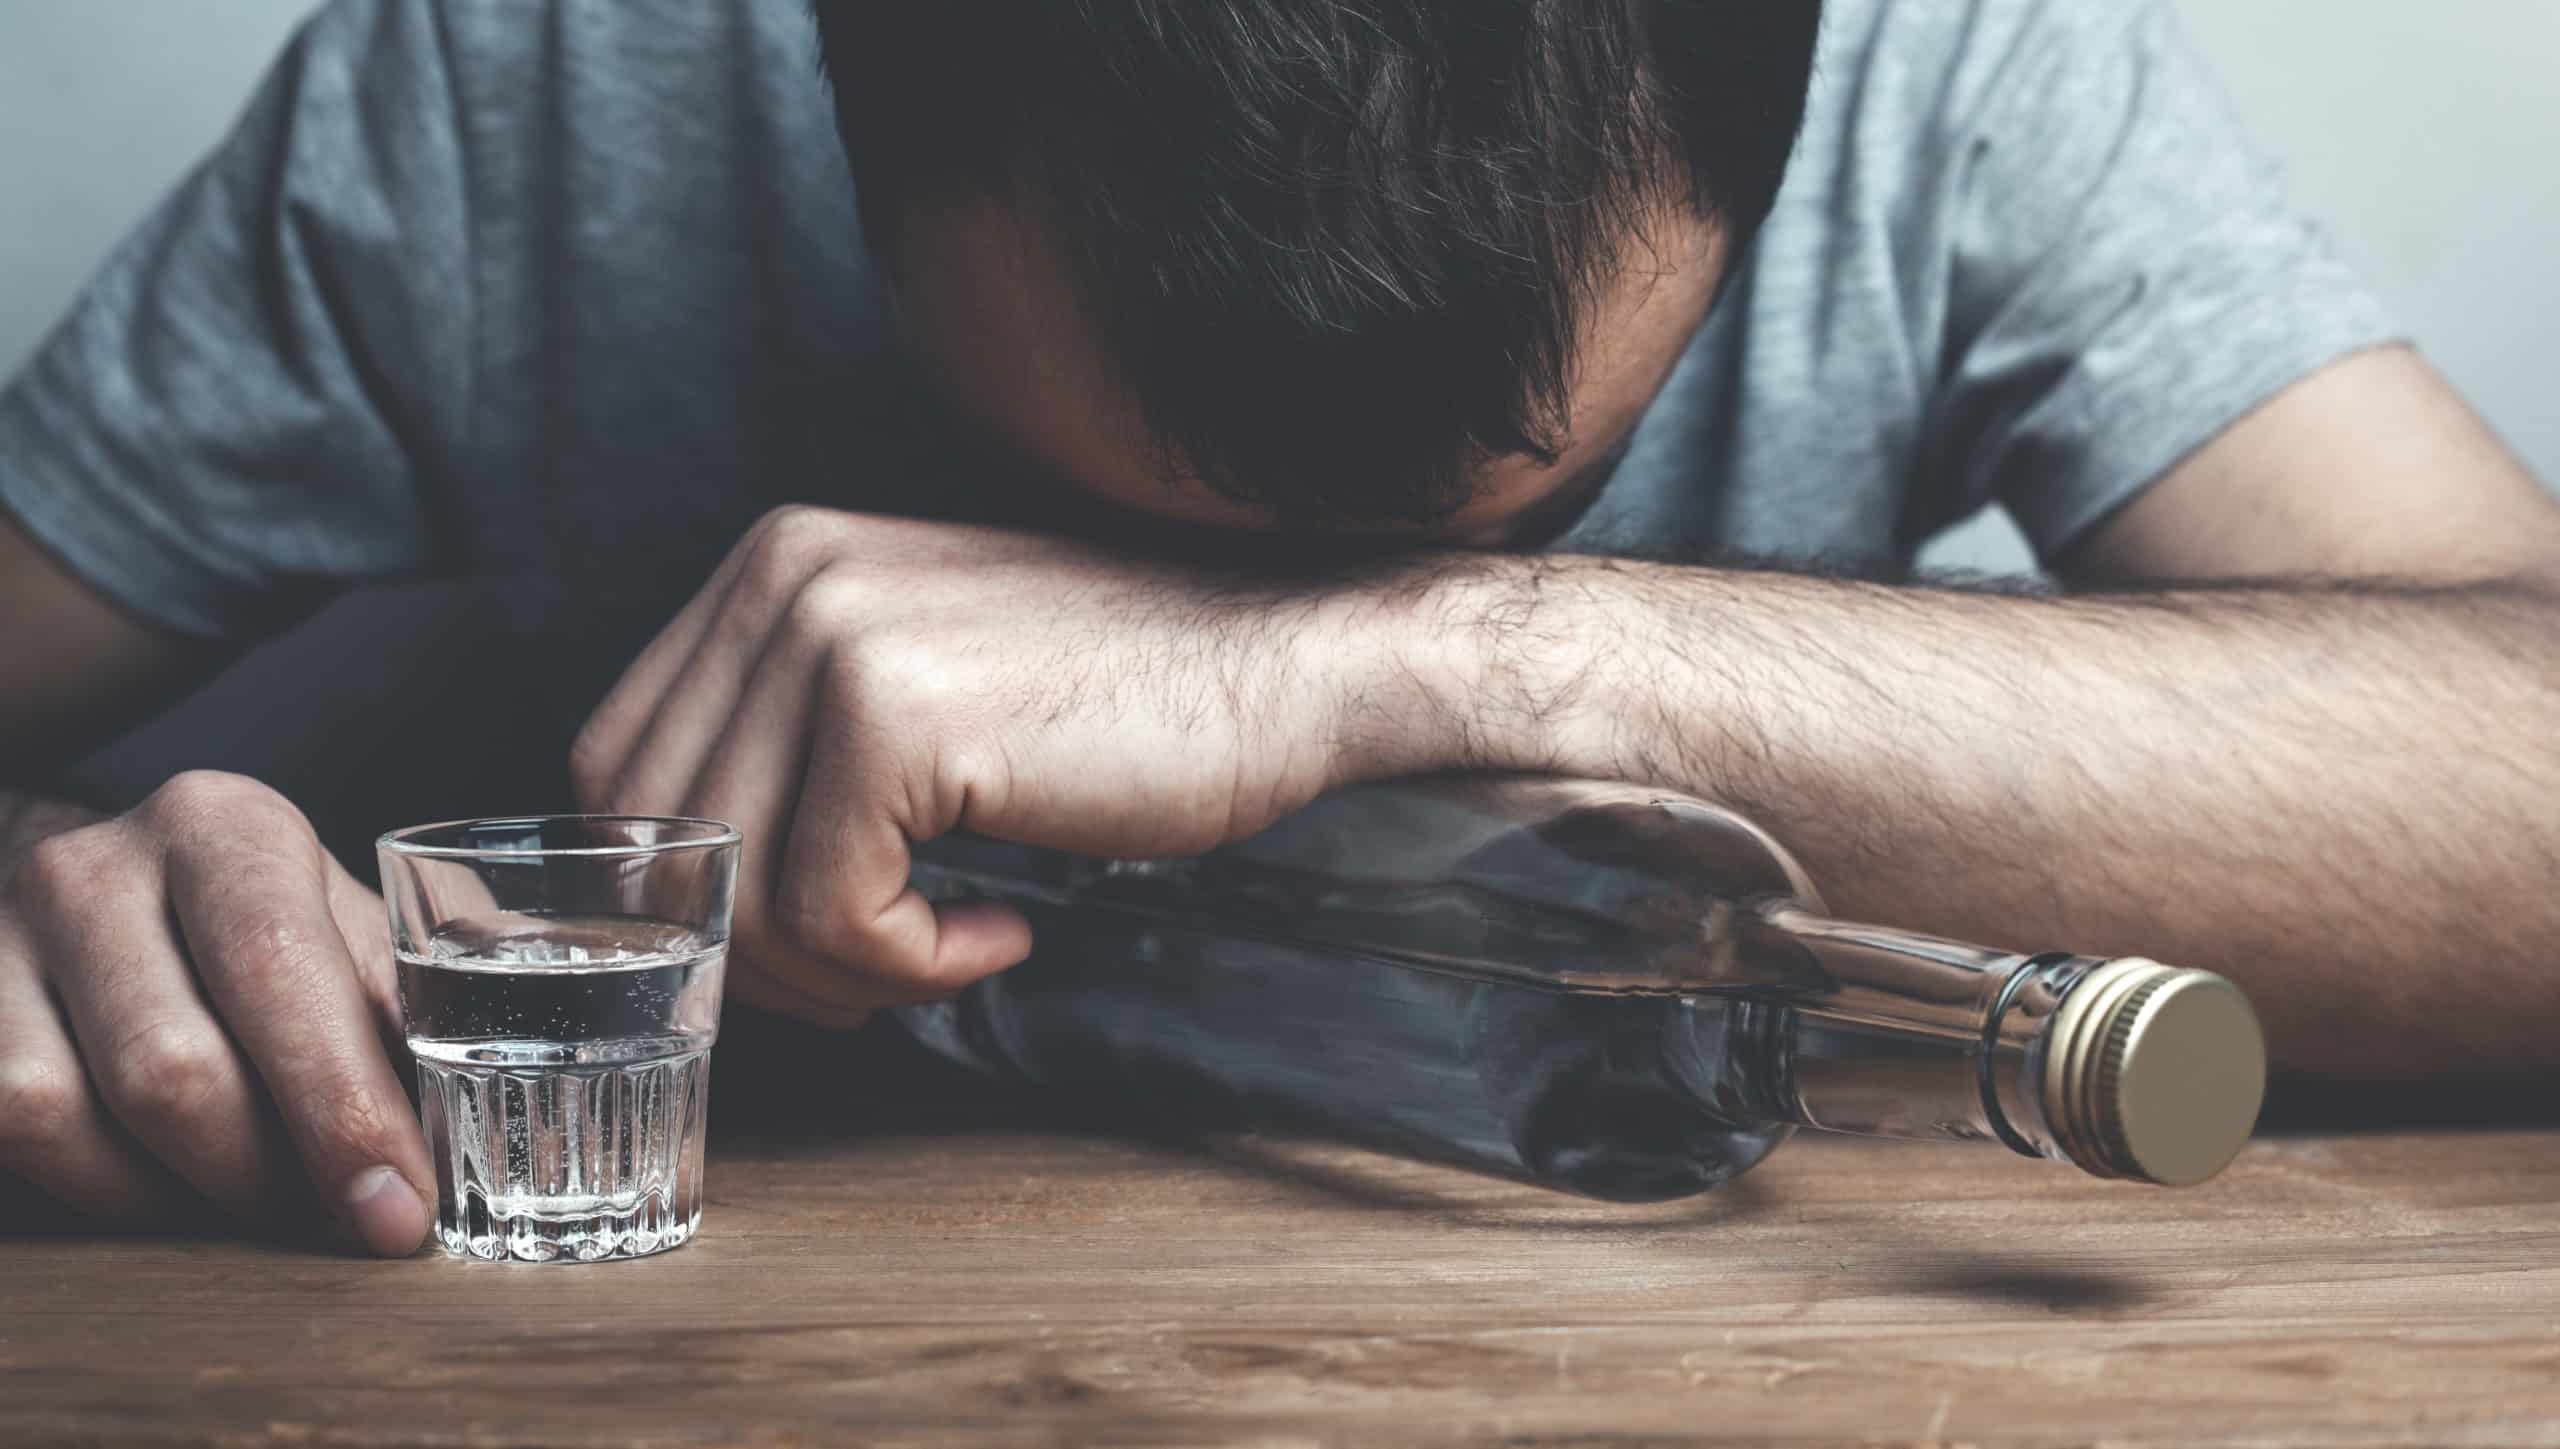 Dangers Of Over Indulging In Alcohol During Isolation